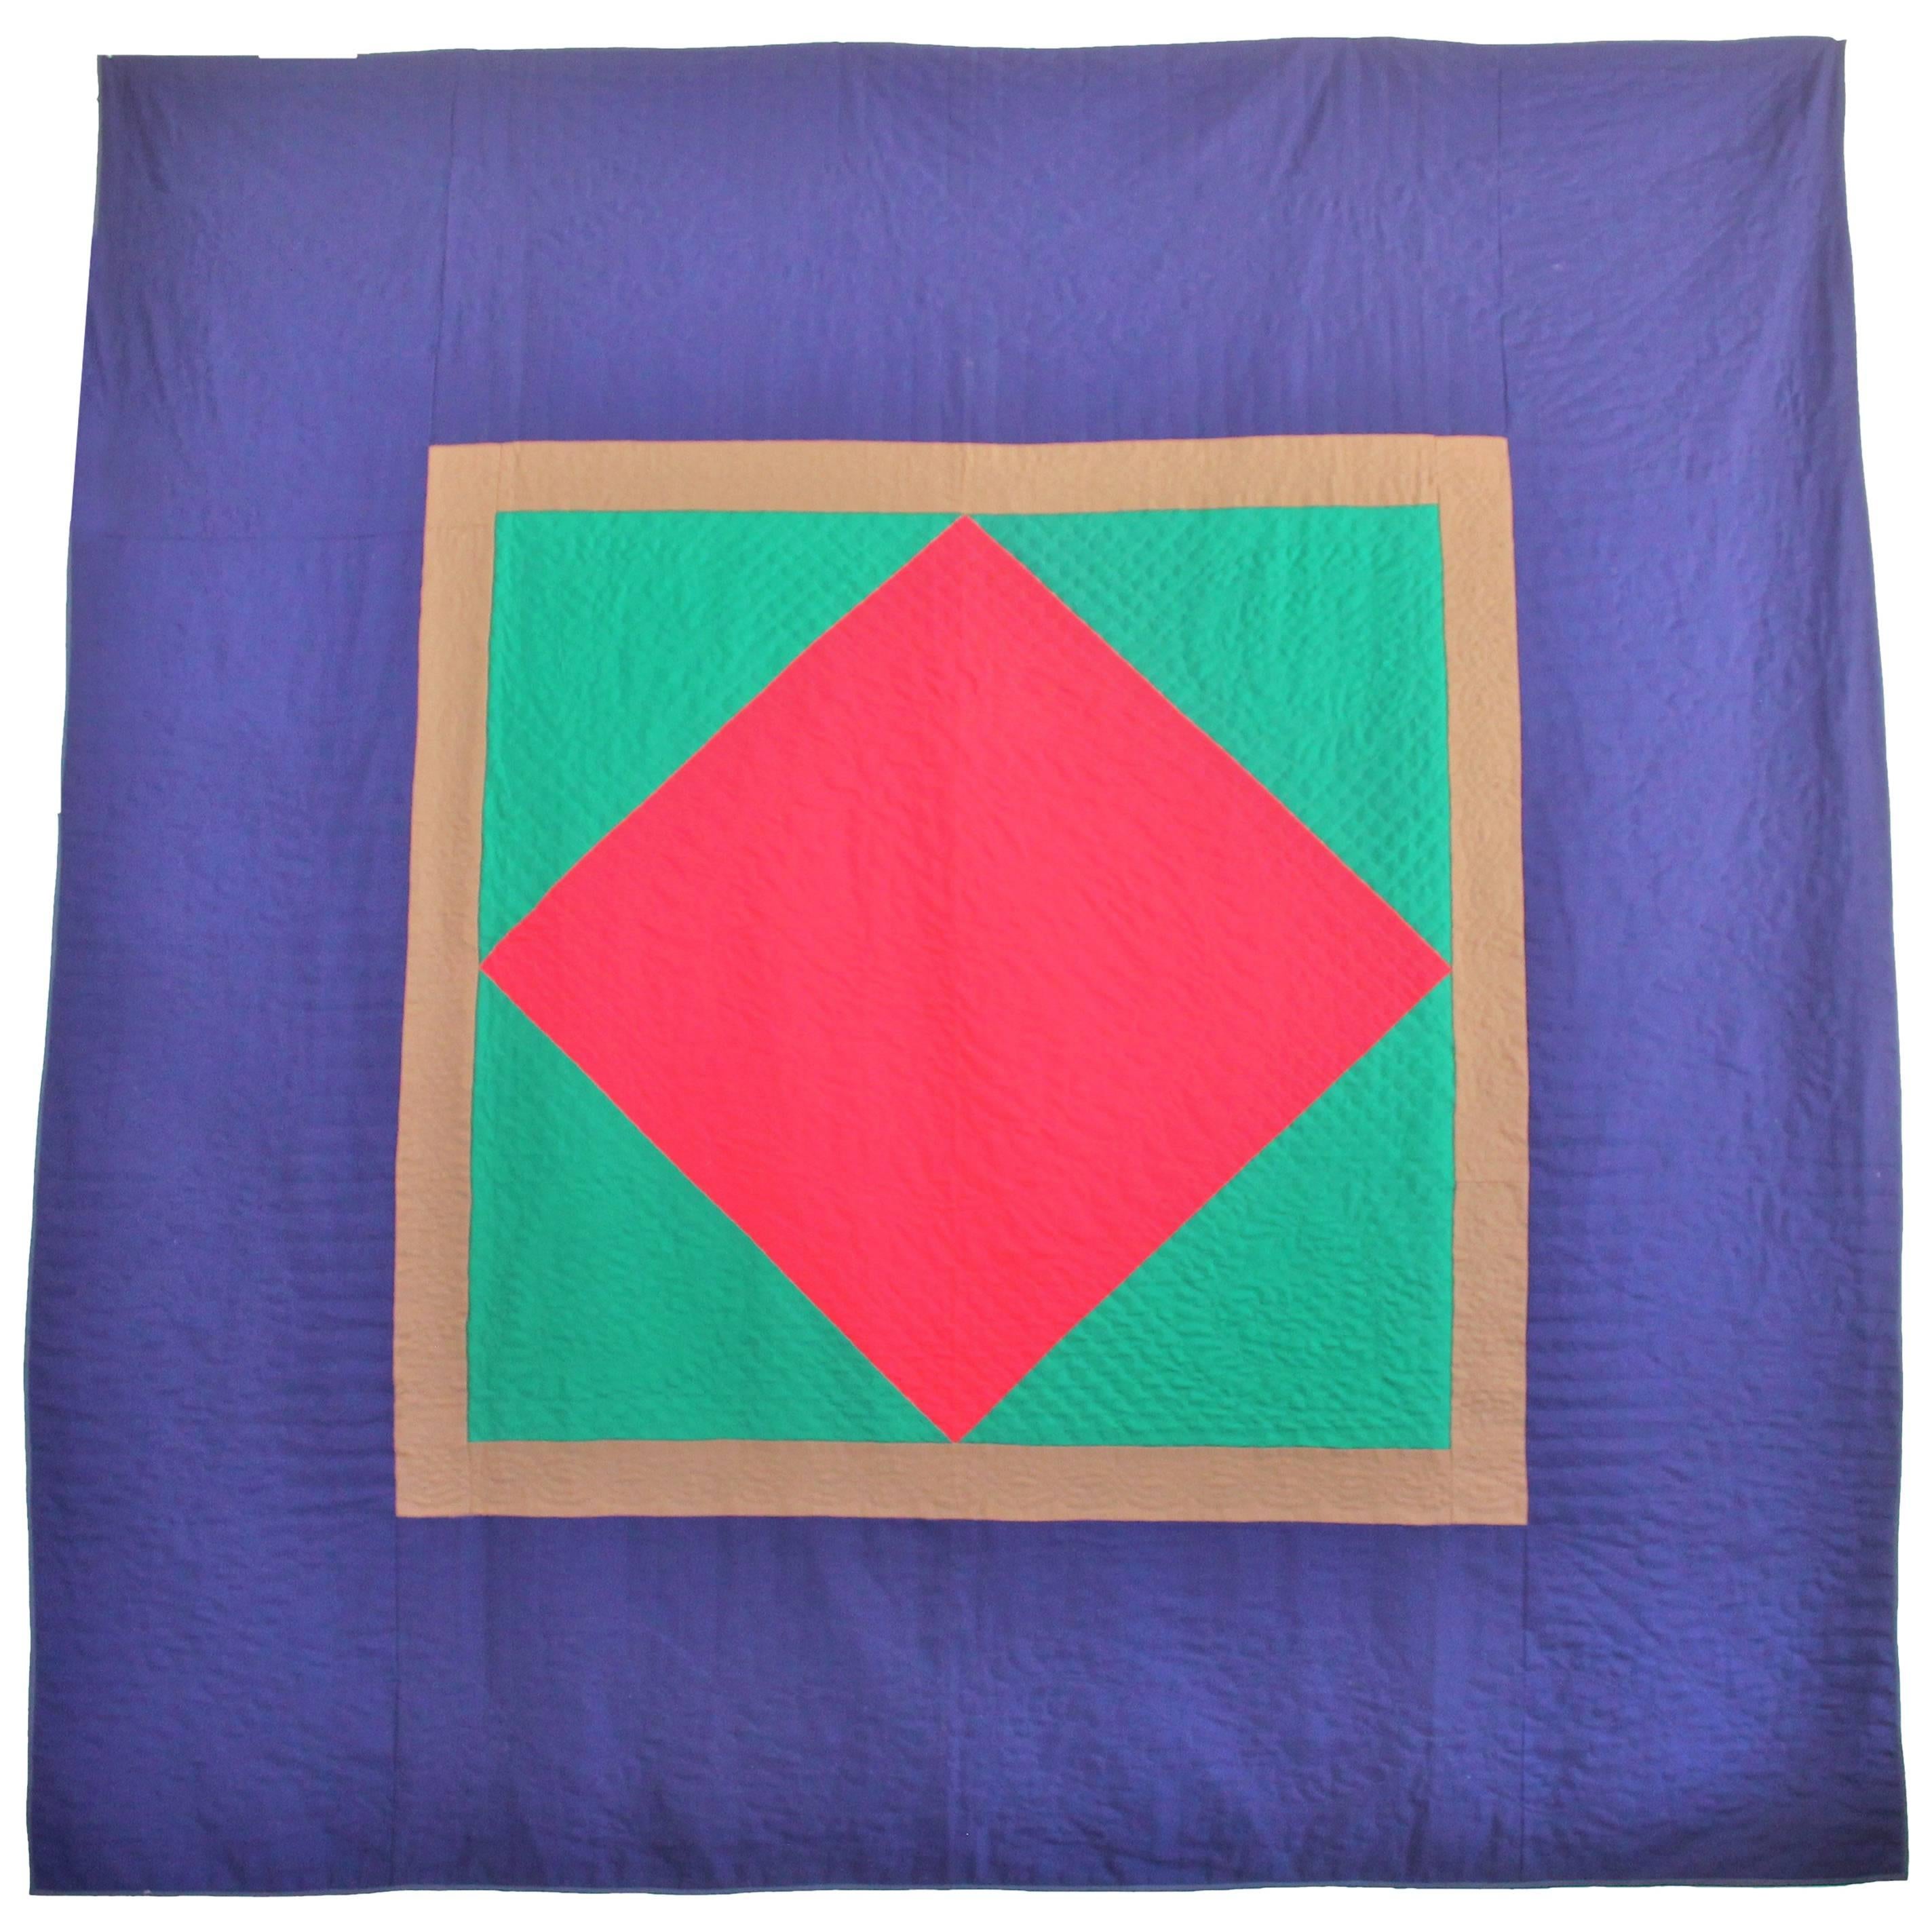 Wool Quilt Diamond in a Square / Lancaster County, Pennsylvania